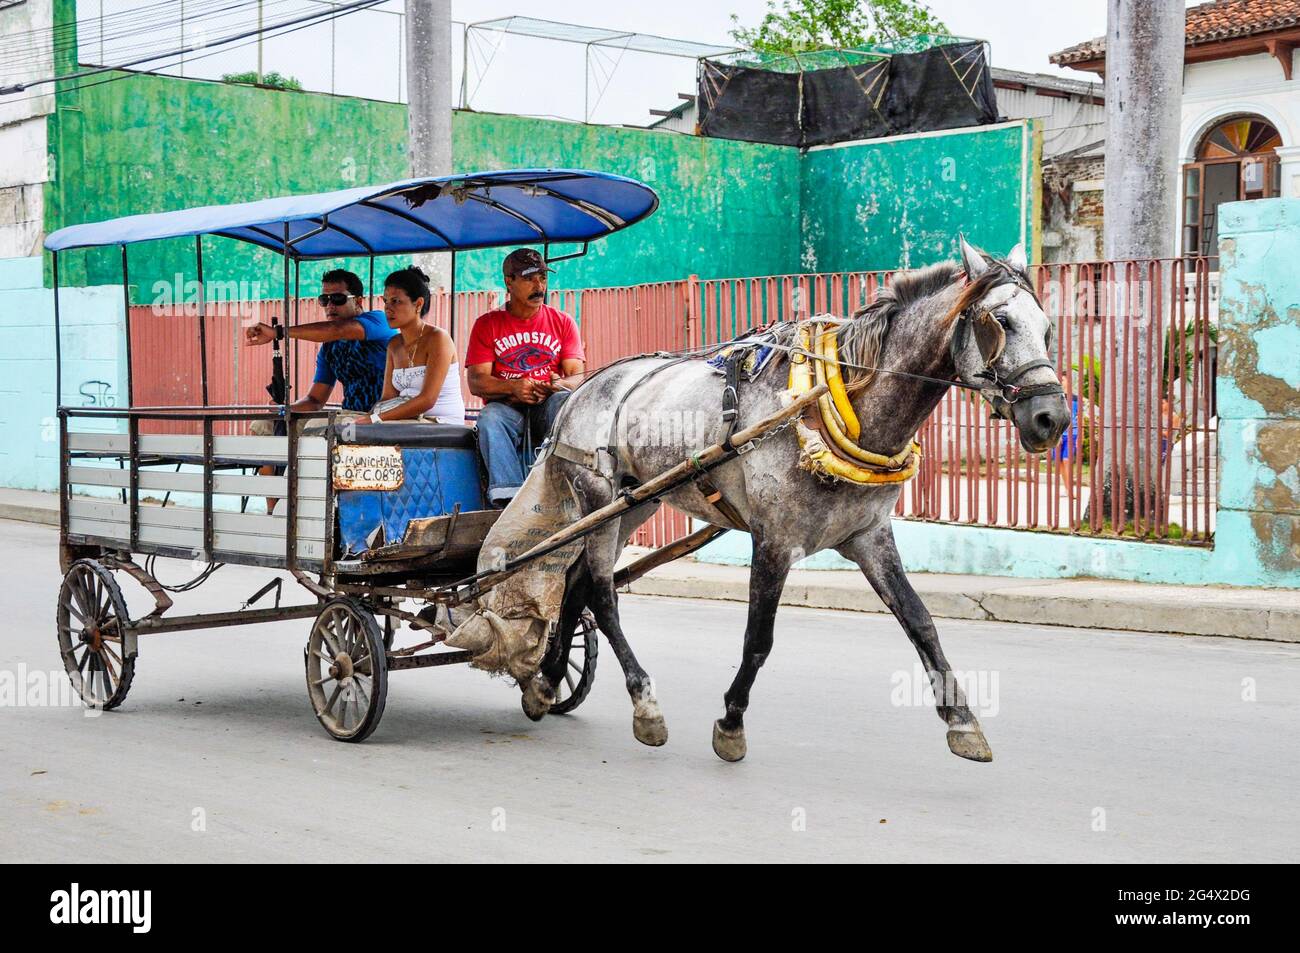 Horse Drawn Carriage with passengers in Cuba, The government has allowed  private transportation to solve the critical problems of the population.  Self Stock Photo - Alamy